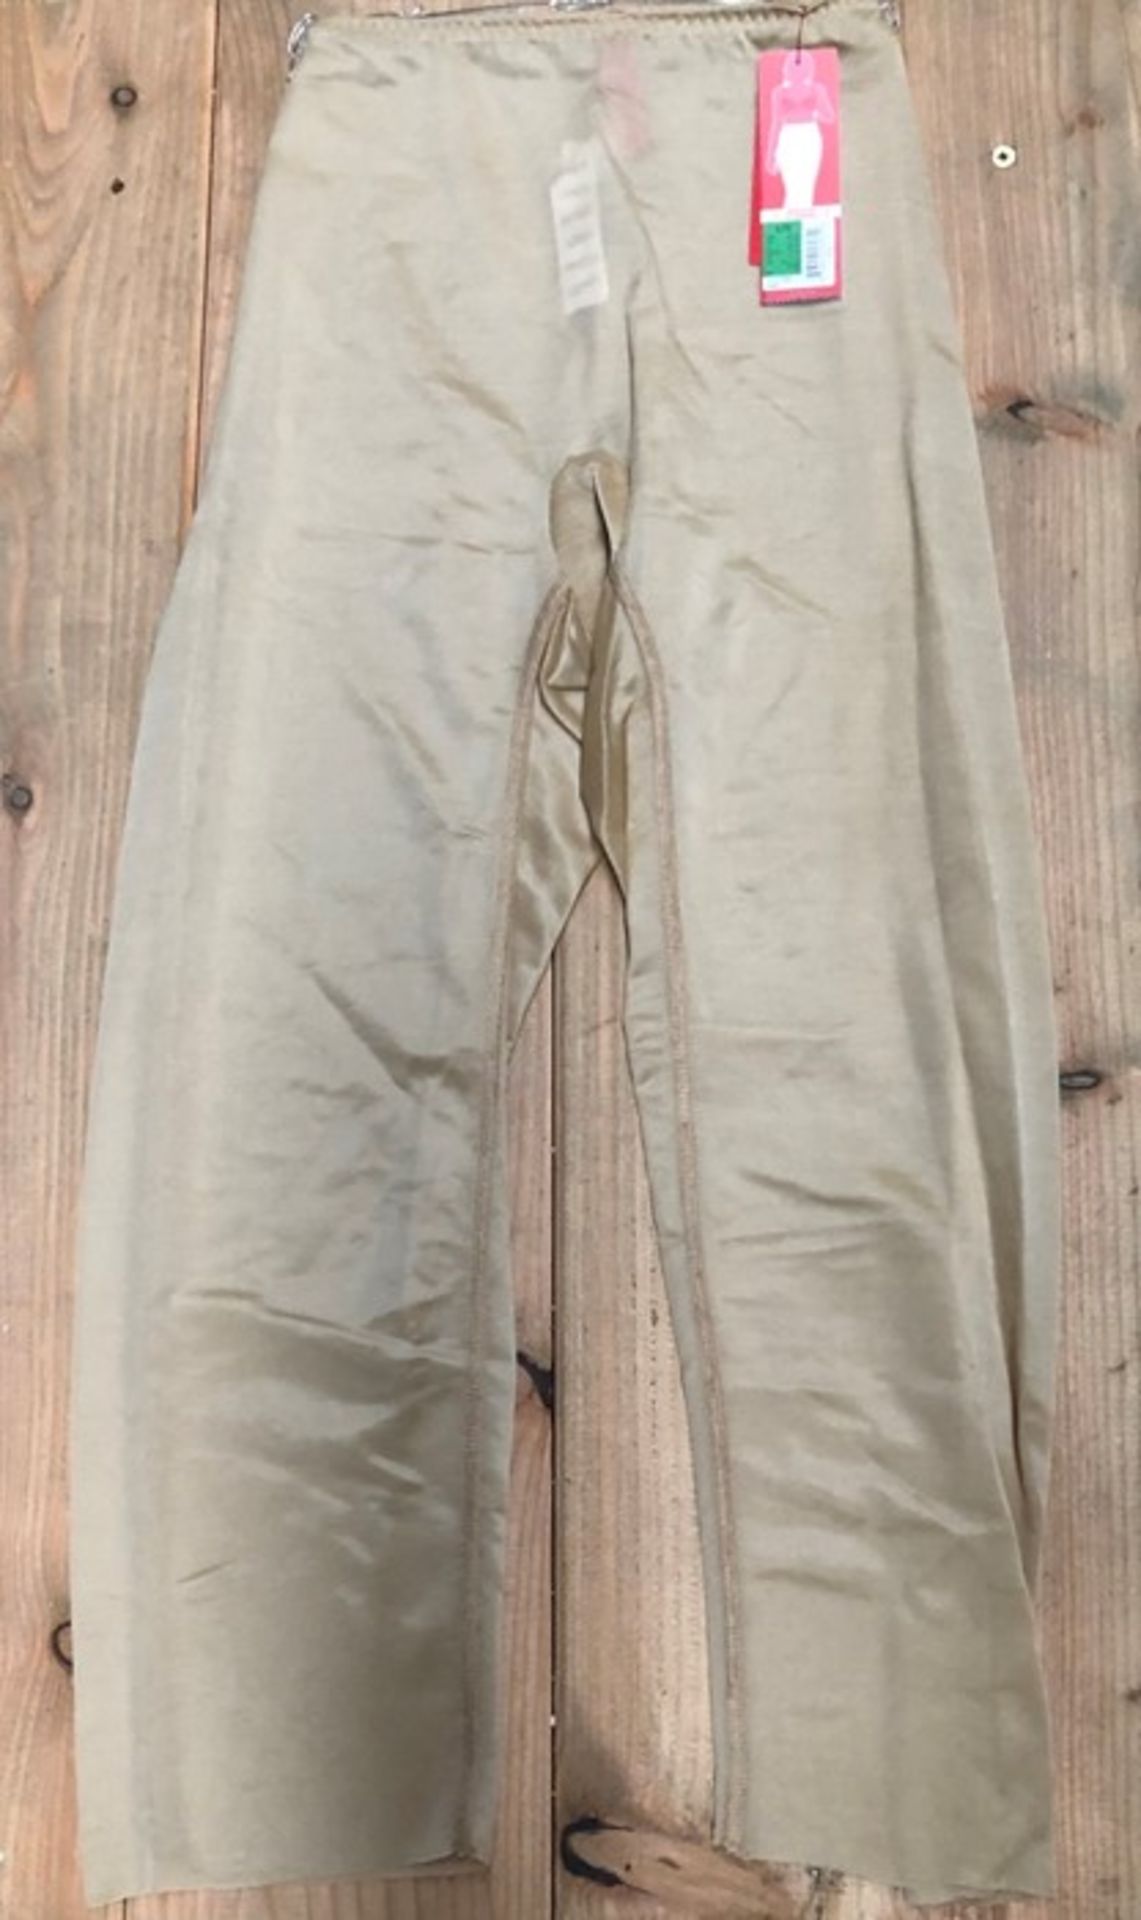 1 LOT TO CONTAIN 3 SPANX PANTS IN NUDE / SIZE LARGE / STYLE 1495 / RRP £144.00 (PUBLIC VIEWING